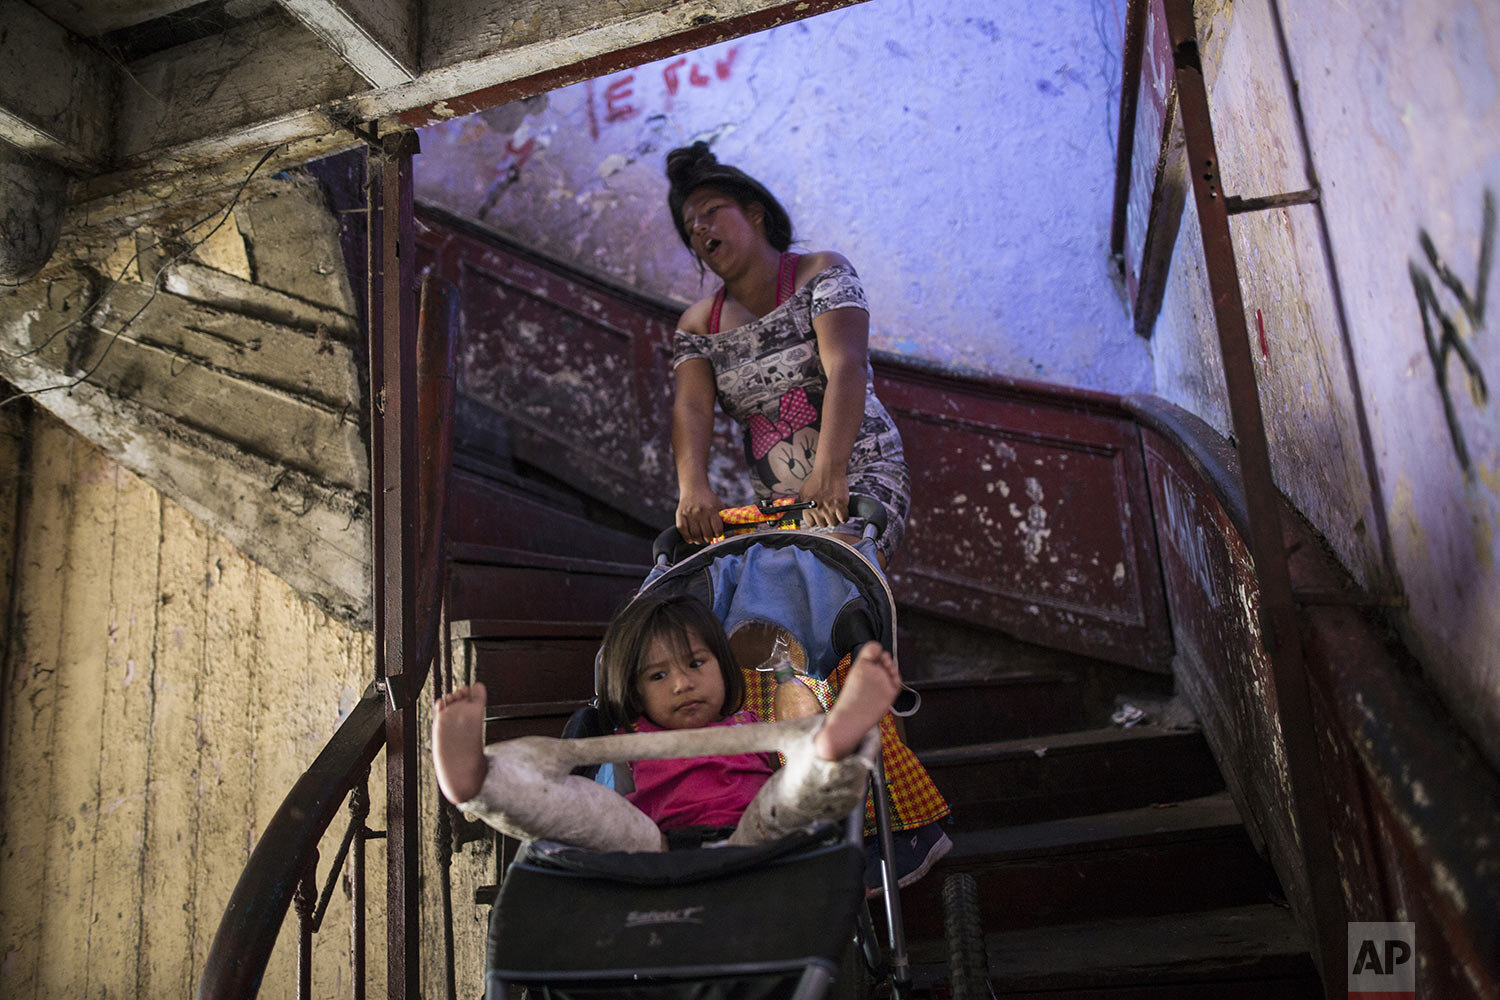  In this March 18, 2020 photo, Nilu Asca, a 24-year-old single mother, struggles to pull a stroller holding her 2-year-old daughter Darleth up a flight of stairs, inside a building nicknamed “Luriganchito,” after the country’s most populous prison, i